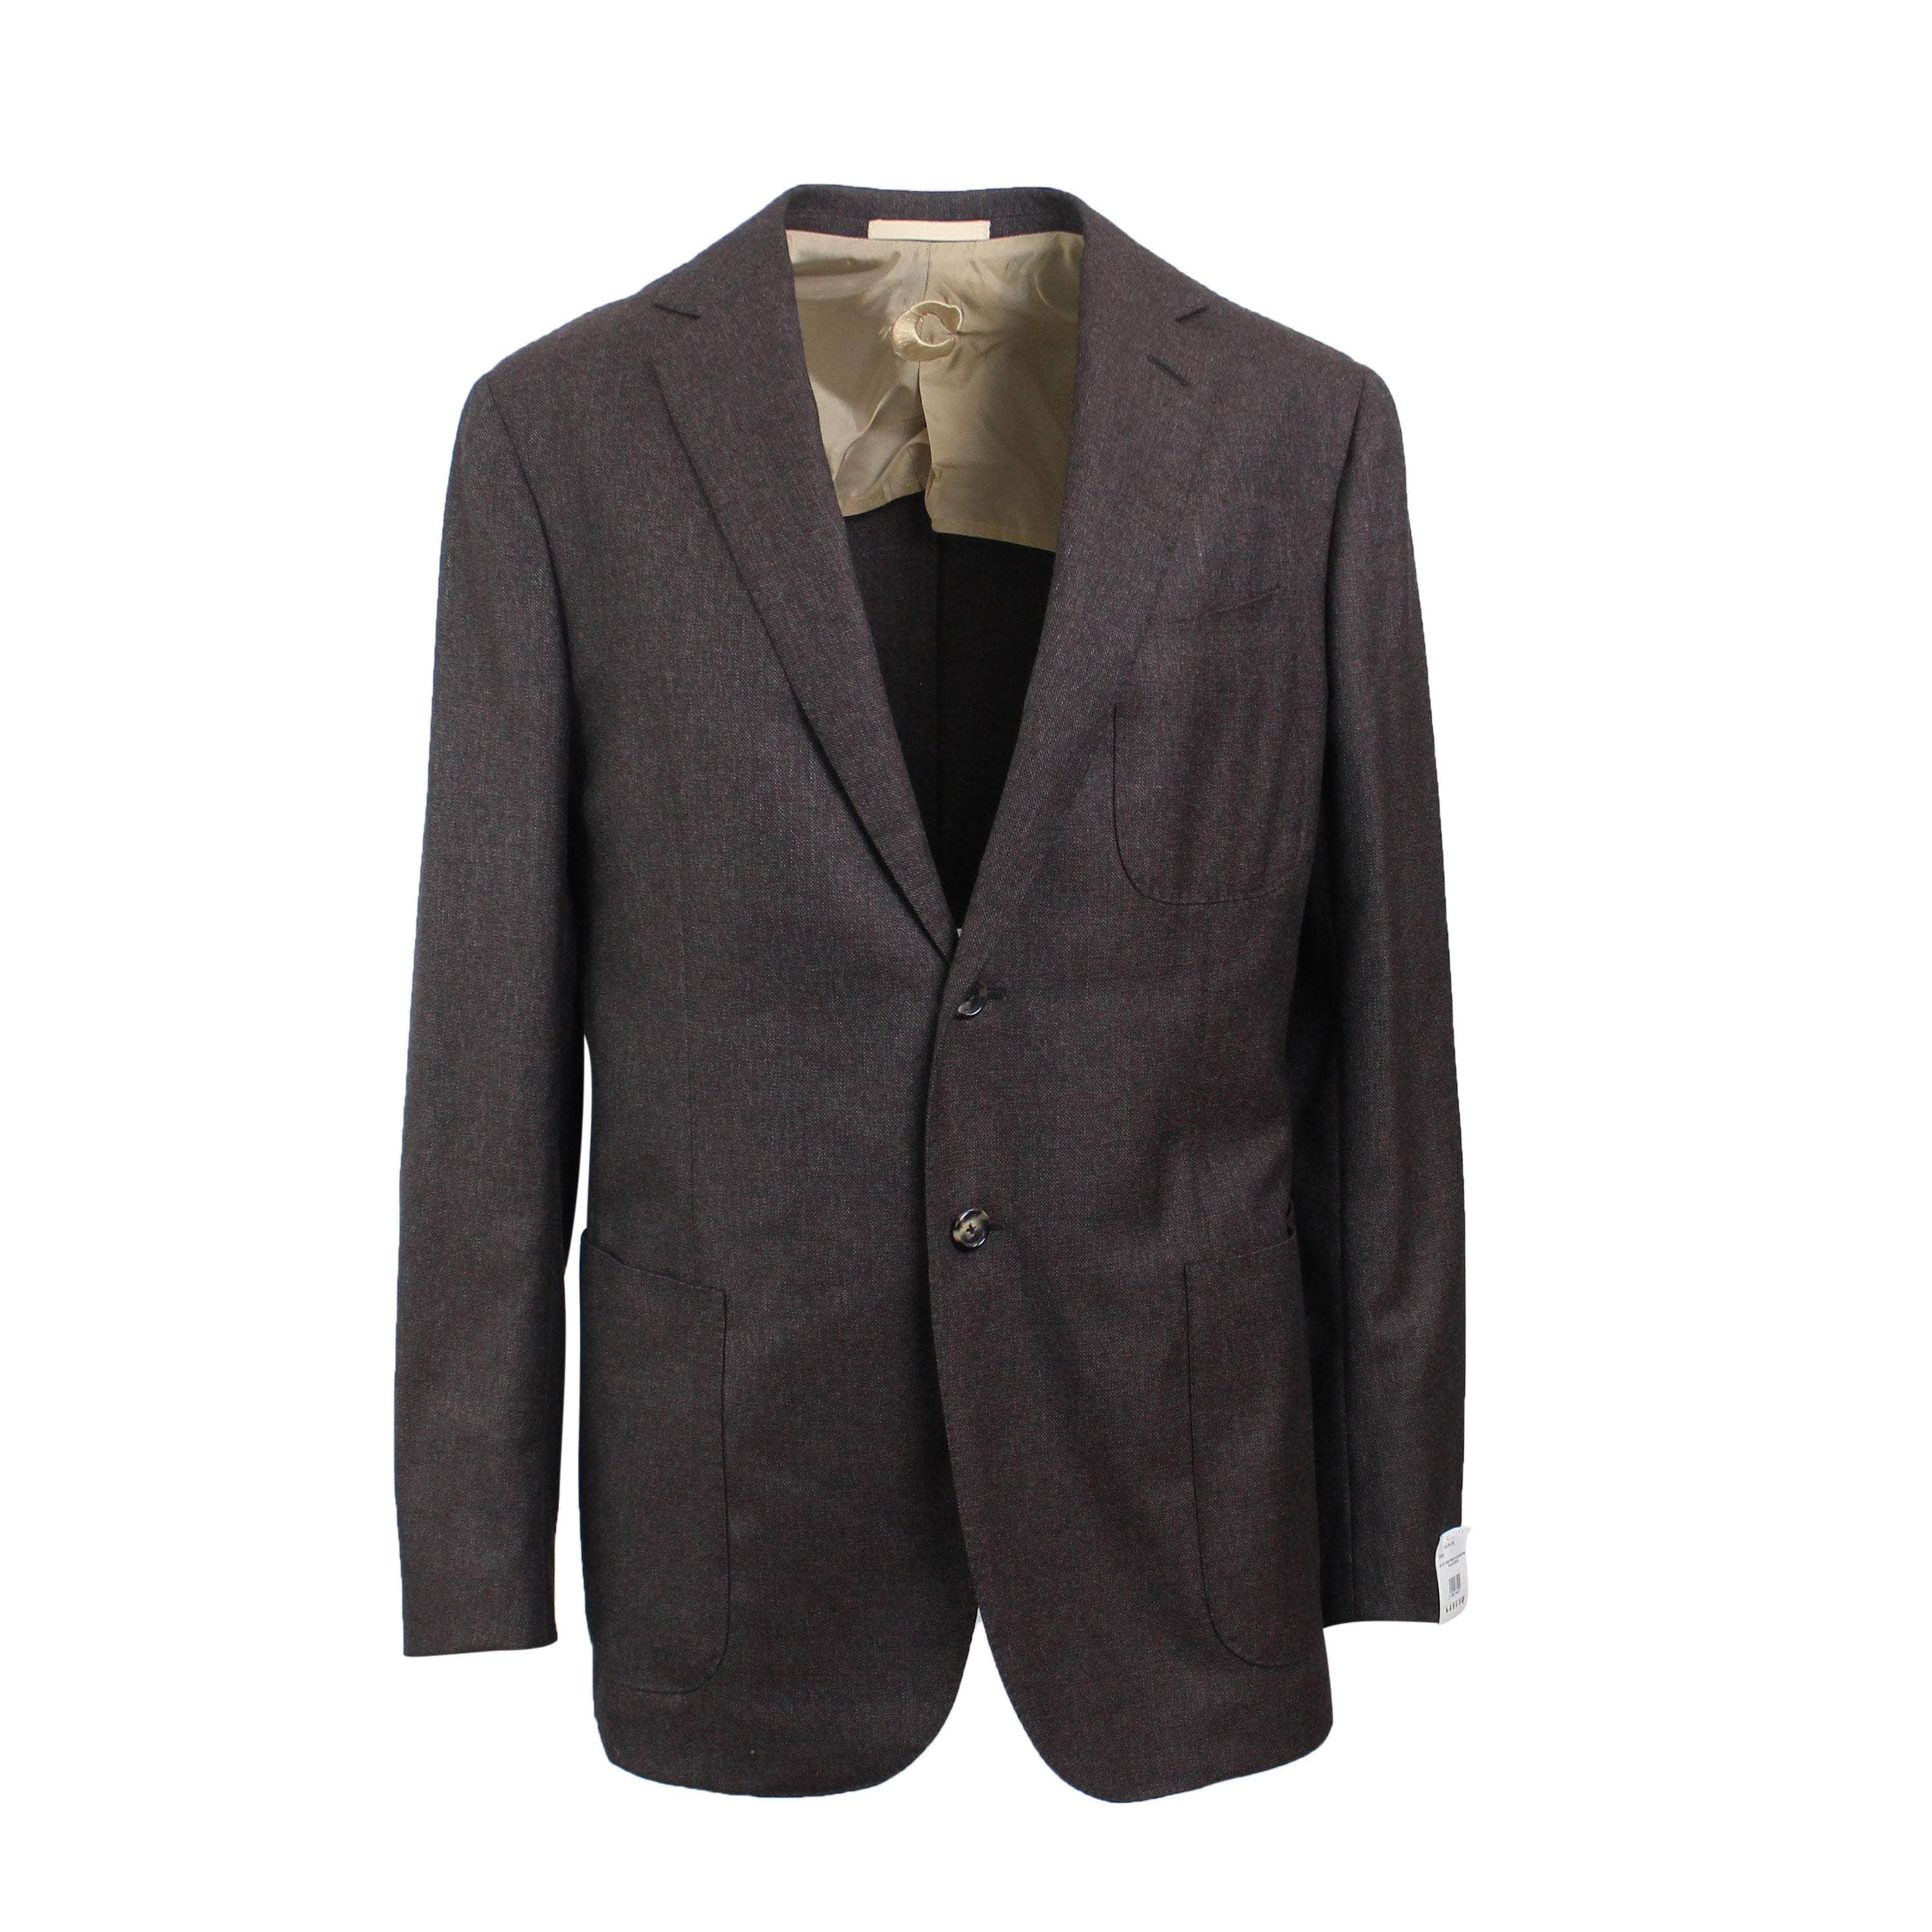 Caruso 500-750, caruso, channelenable-all, chicmi, couponcollection, main-clothing, shop375, size-50, Stadium Goods, stadiumgoods 50 Single Breasted Brown Peak Lapel Suit CRS-XTPS-0154/50 CRS-XTPS-0154/50